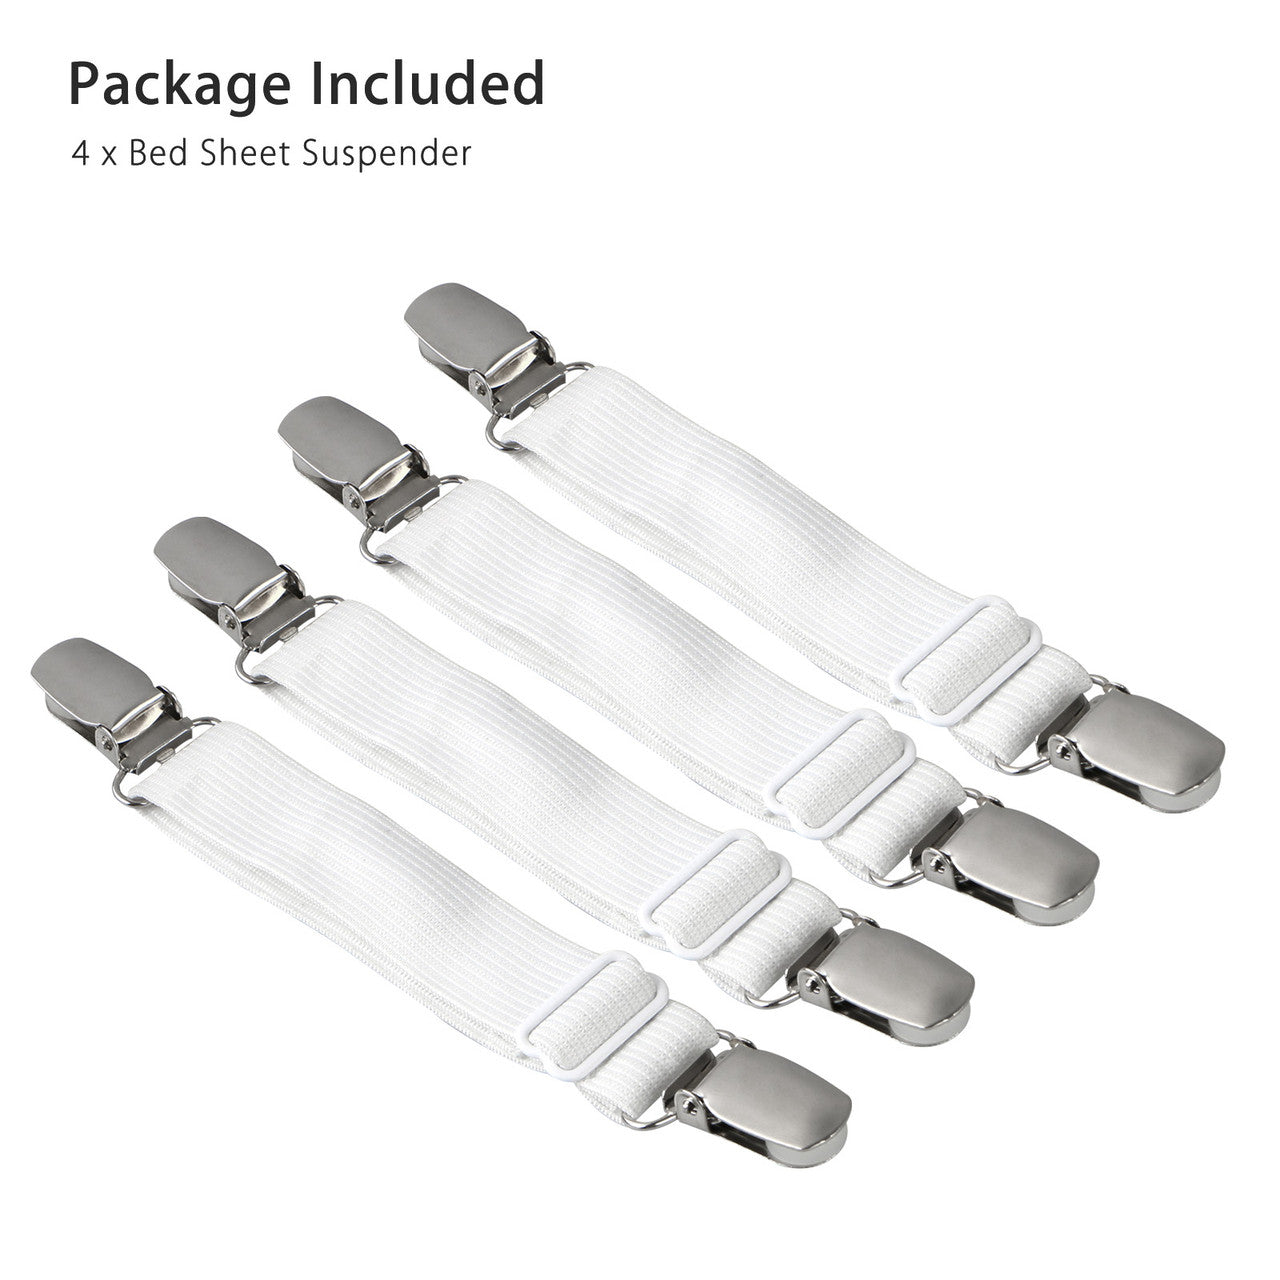 Sheet Band Straps Suspenders White Adjustable Bed Corner Holder Elastic Fasteners Clips Grippers Mattress Pad Cover Fitted, 4Pcs